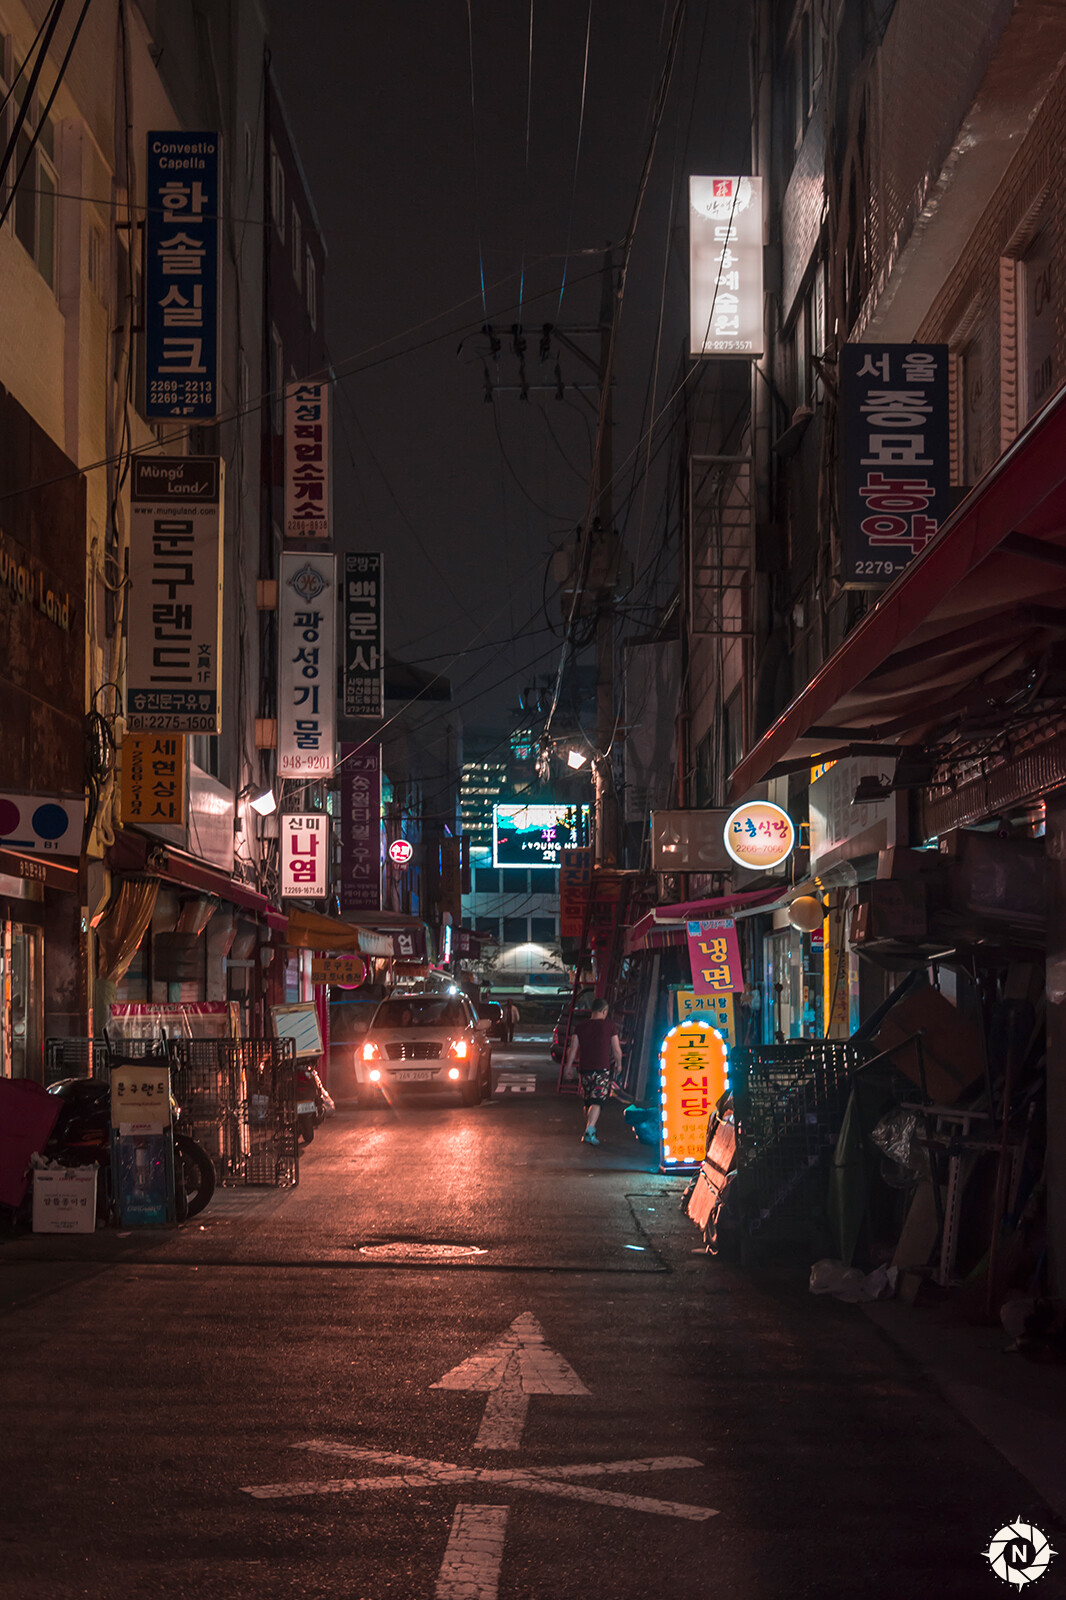 From the Photo Reference Pack: Seoul By Night

https://www.artstation.com/a/19